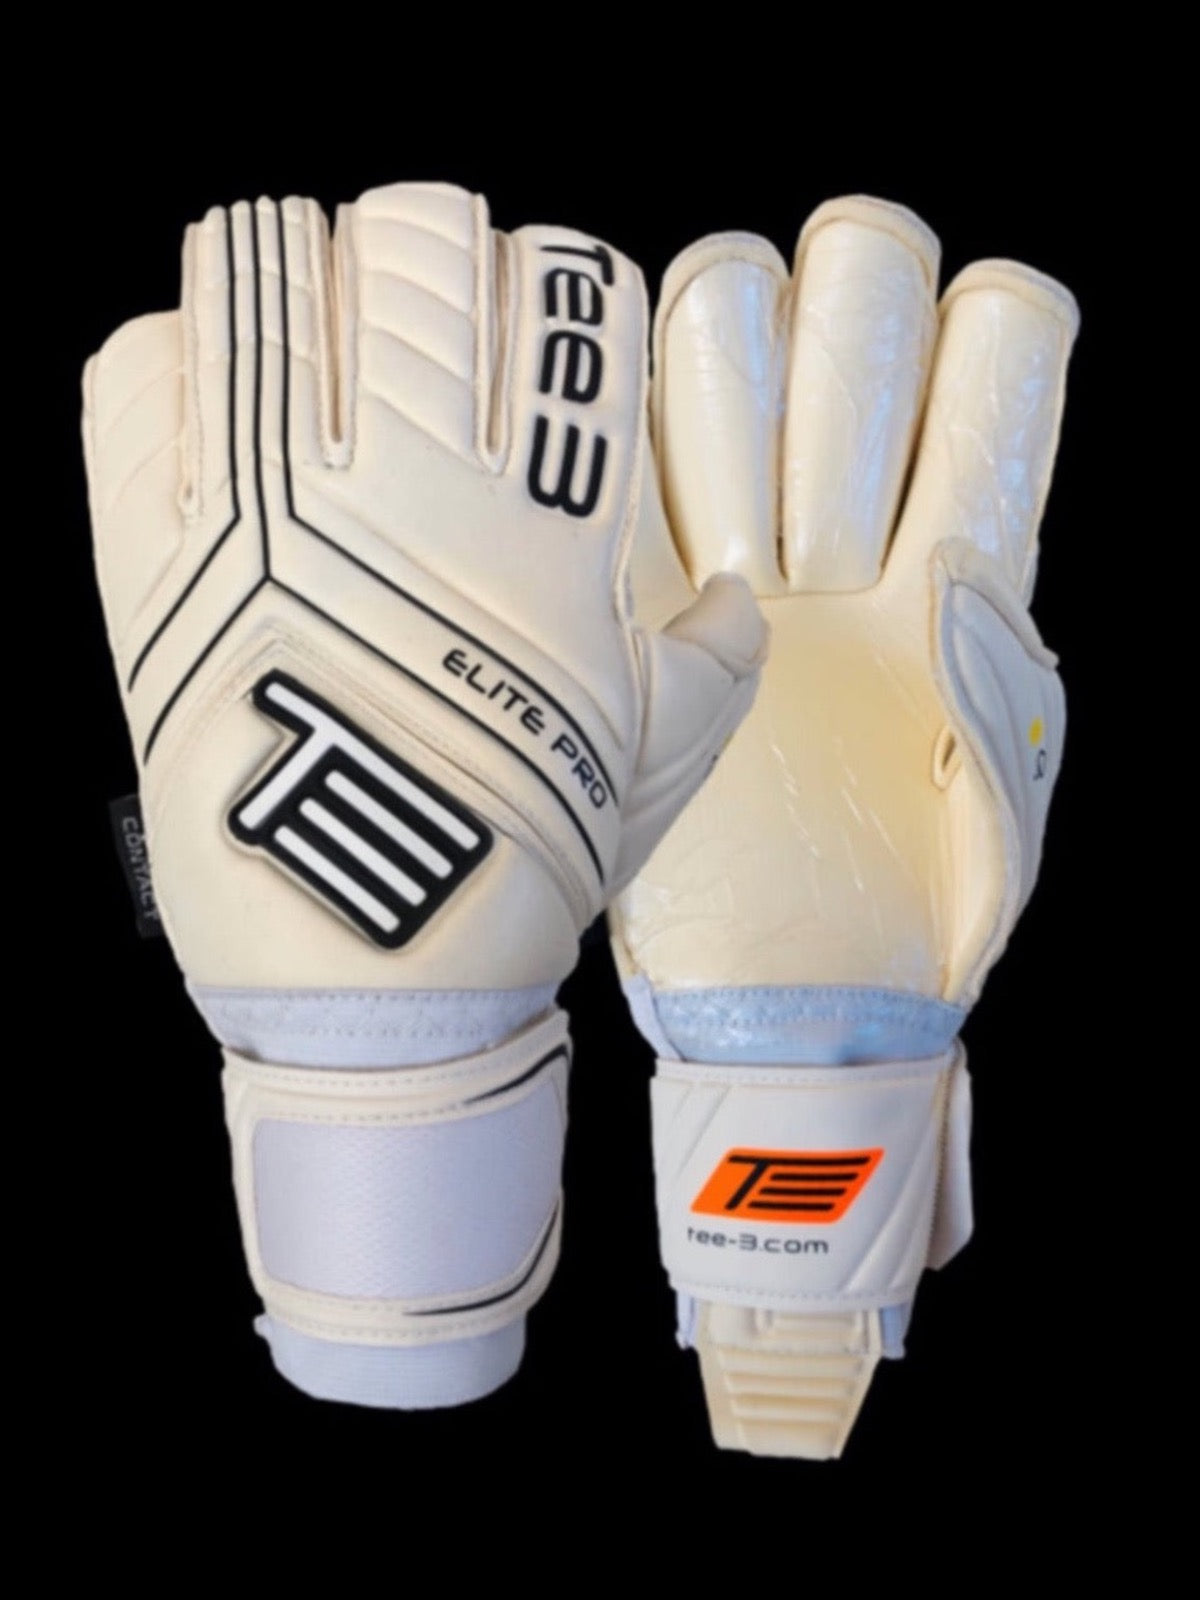 A white roll finger goalkeeping glove with black detail and grippy white contact latex worn by professional goalkeepers